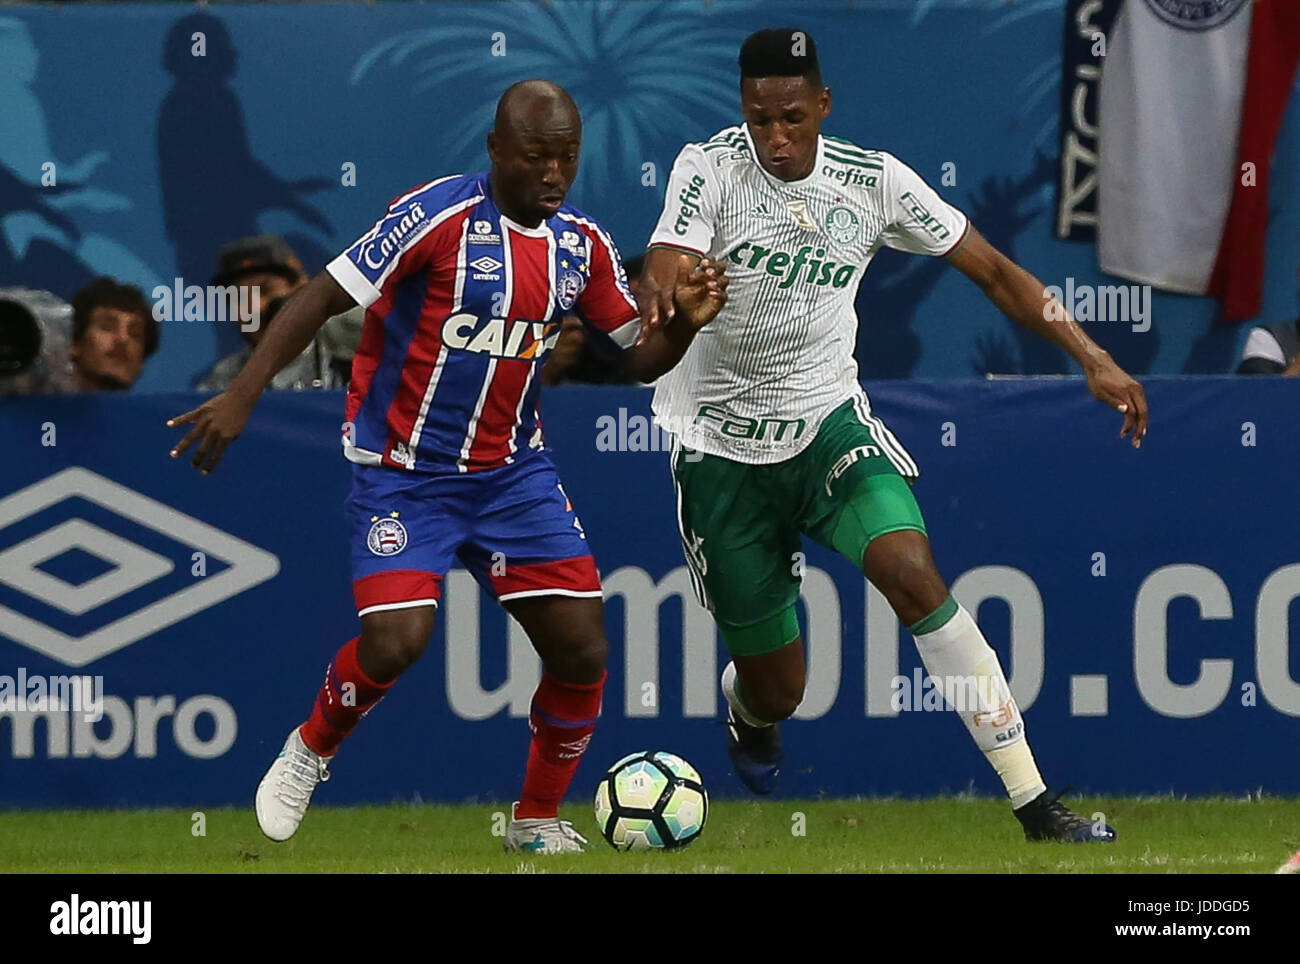 Salvador, Brazil. 18th June, 2017. The player Mina, from SE Palmeiras, plays the ball with player Pablo Armero of EC Bahia during a match valid for the eighth round of the Brazilian Championship, Serie A, at the Fonte Nova Arena. Credit: Cesar Greco/FotoArena/Alamy Live News Stock Photo